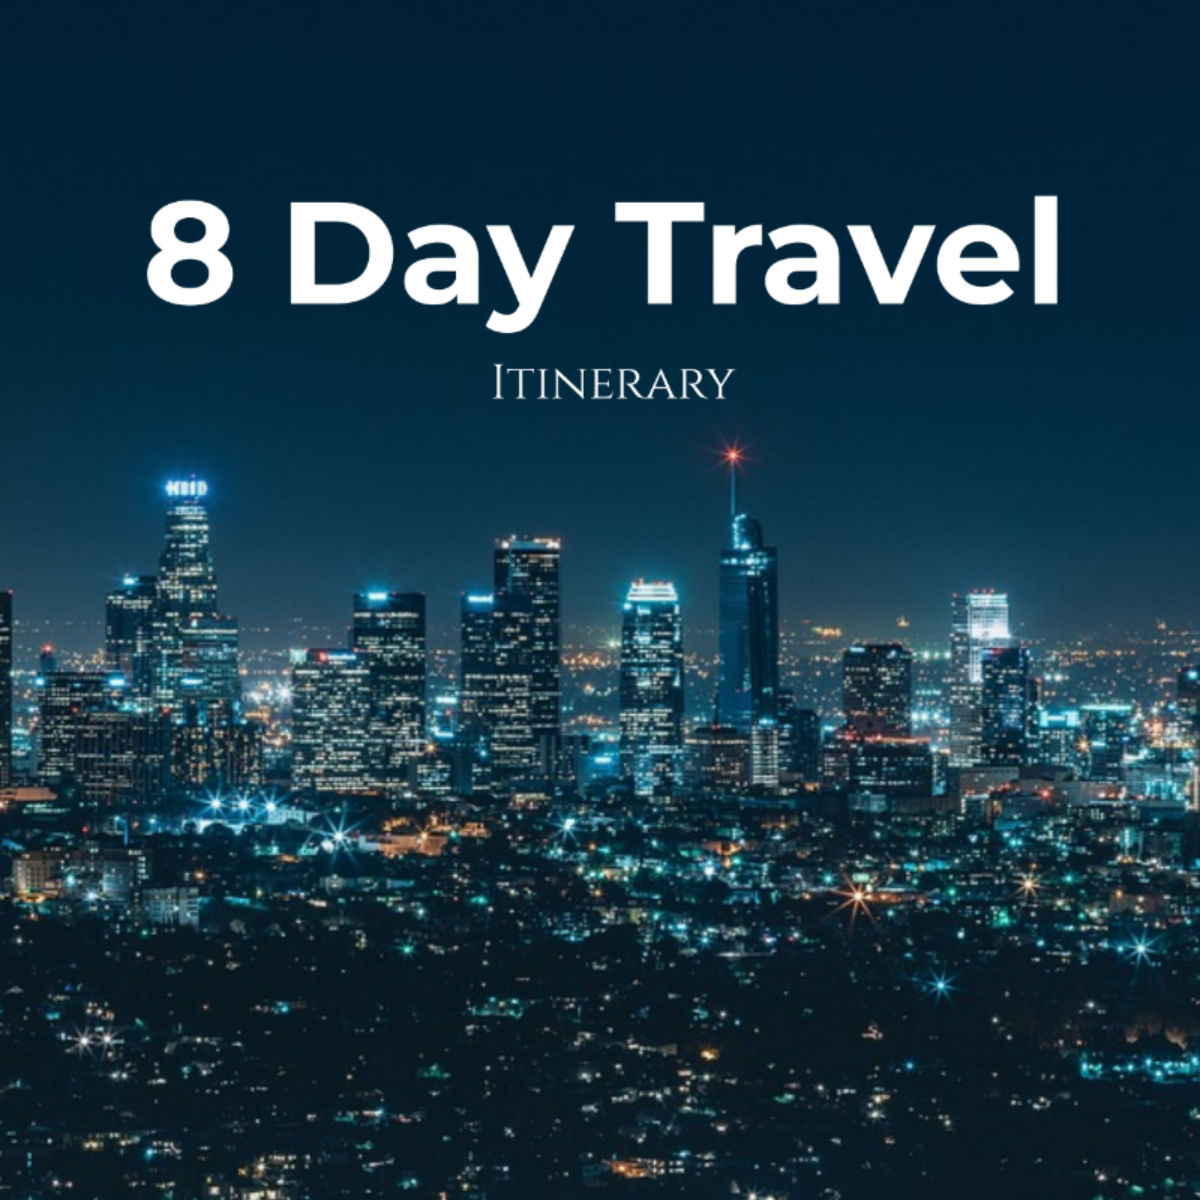 8 Day Travel Itinerary Template